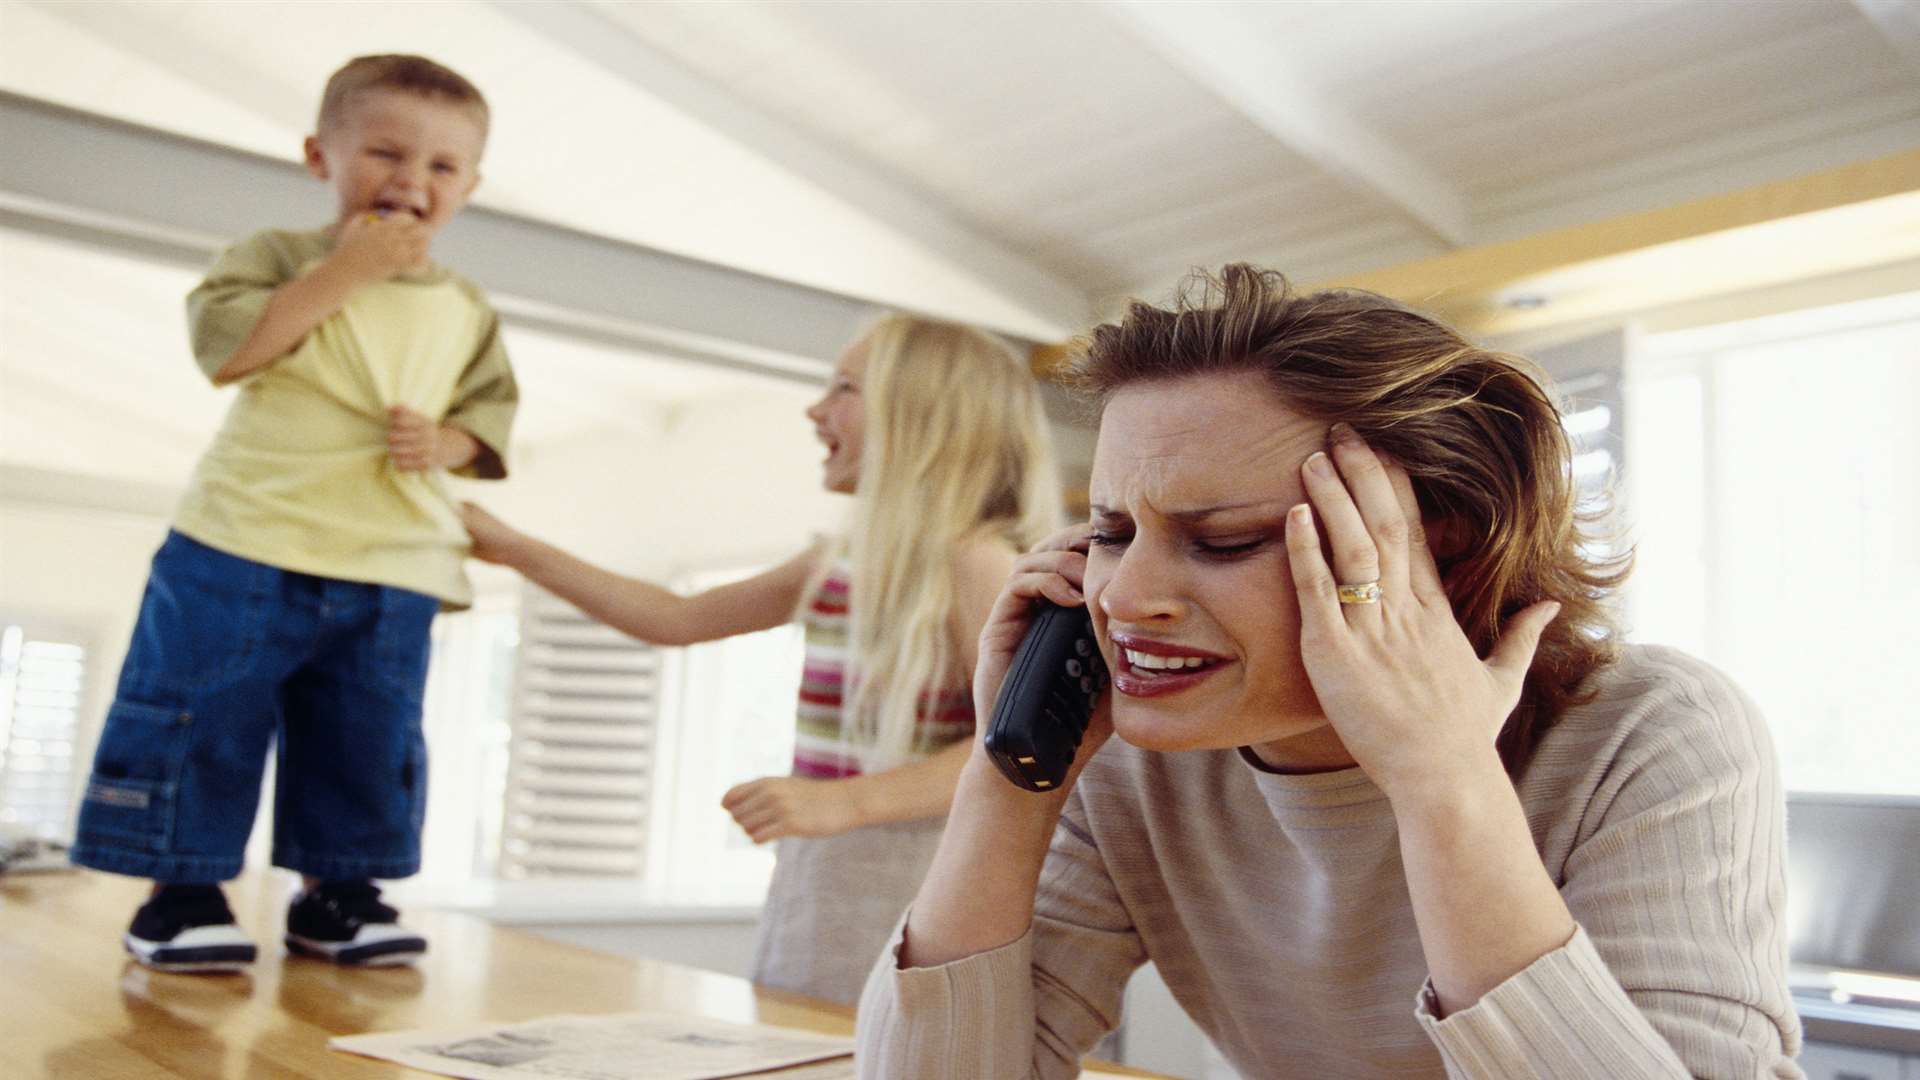 On average mums have three migraines a year